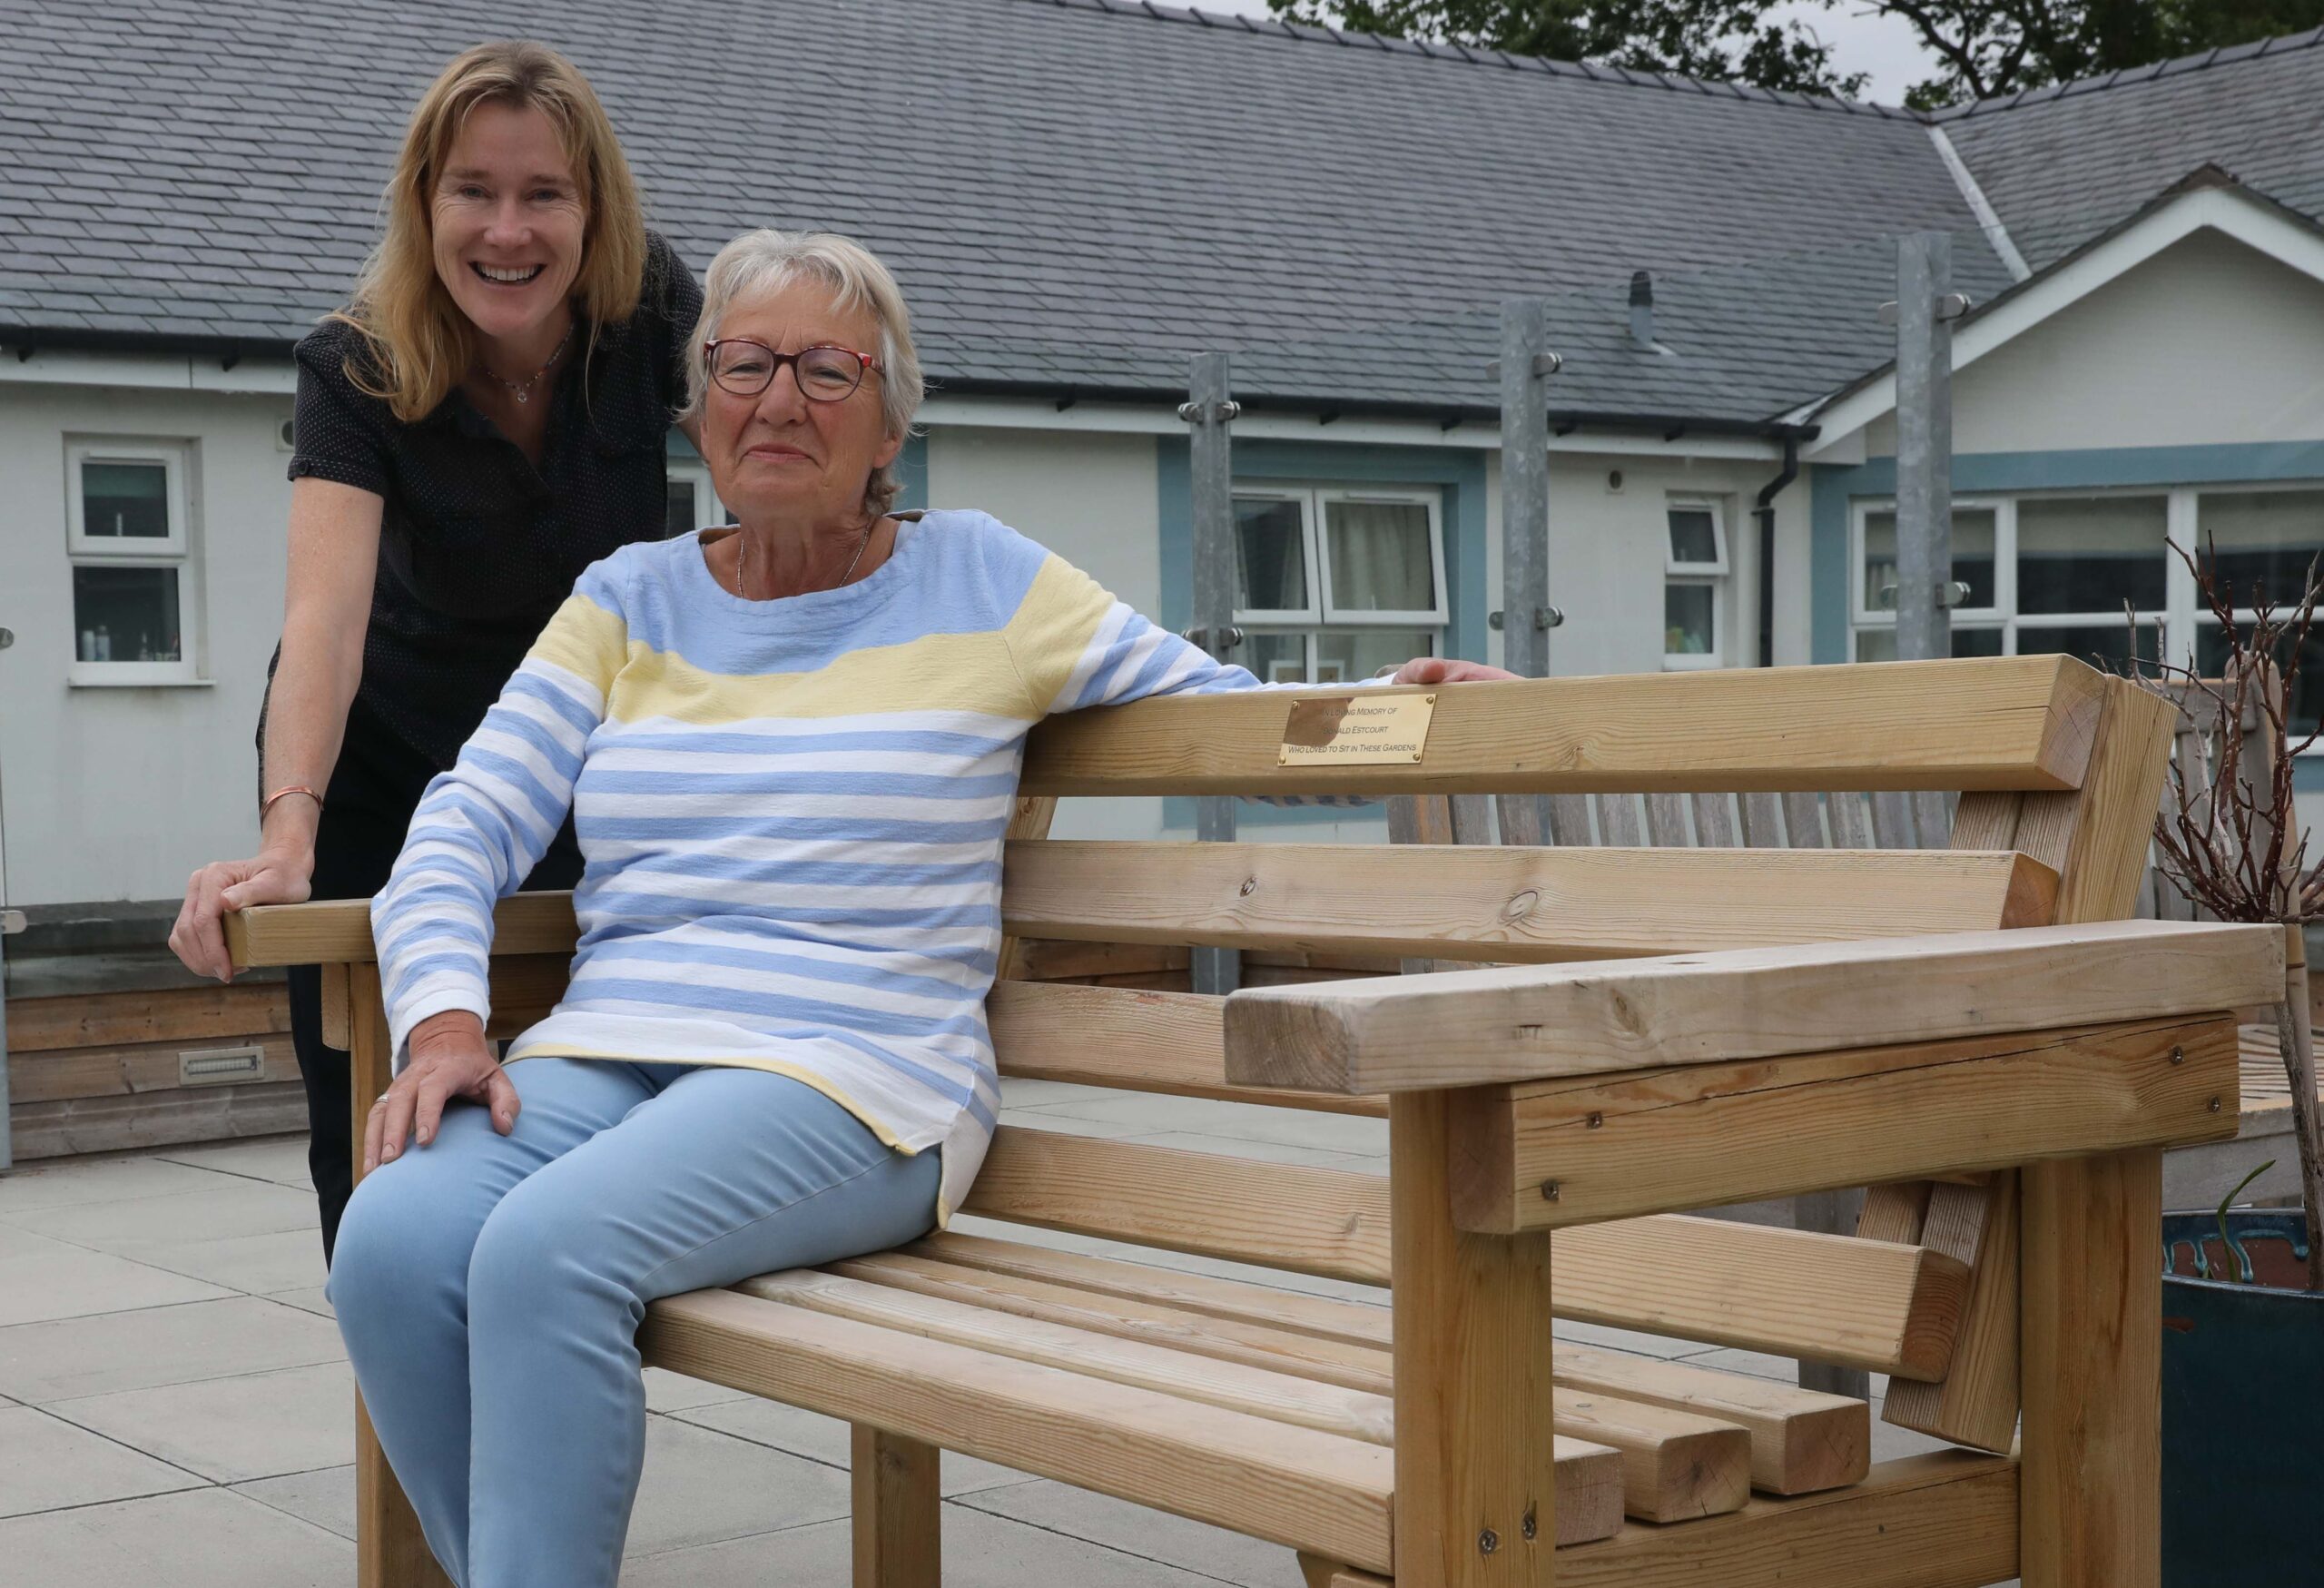 Gwynedd fundraiser Janet takes well-earned rest on bench donated in memory of her dad